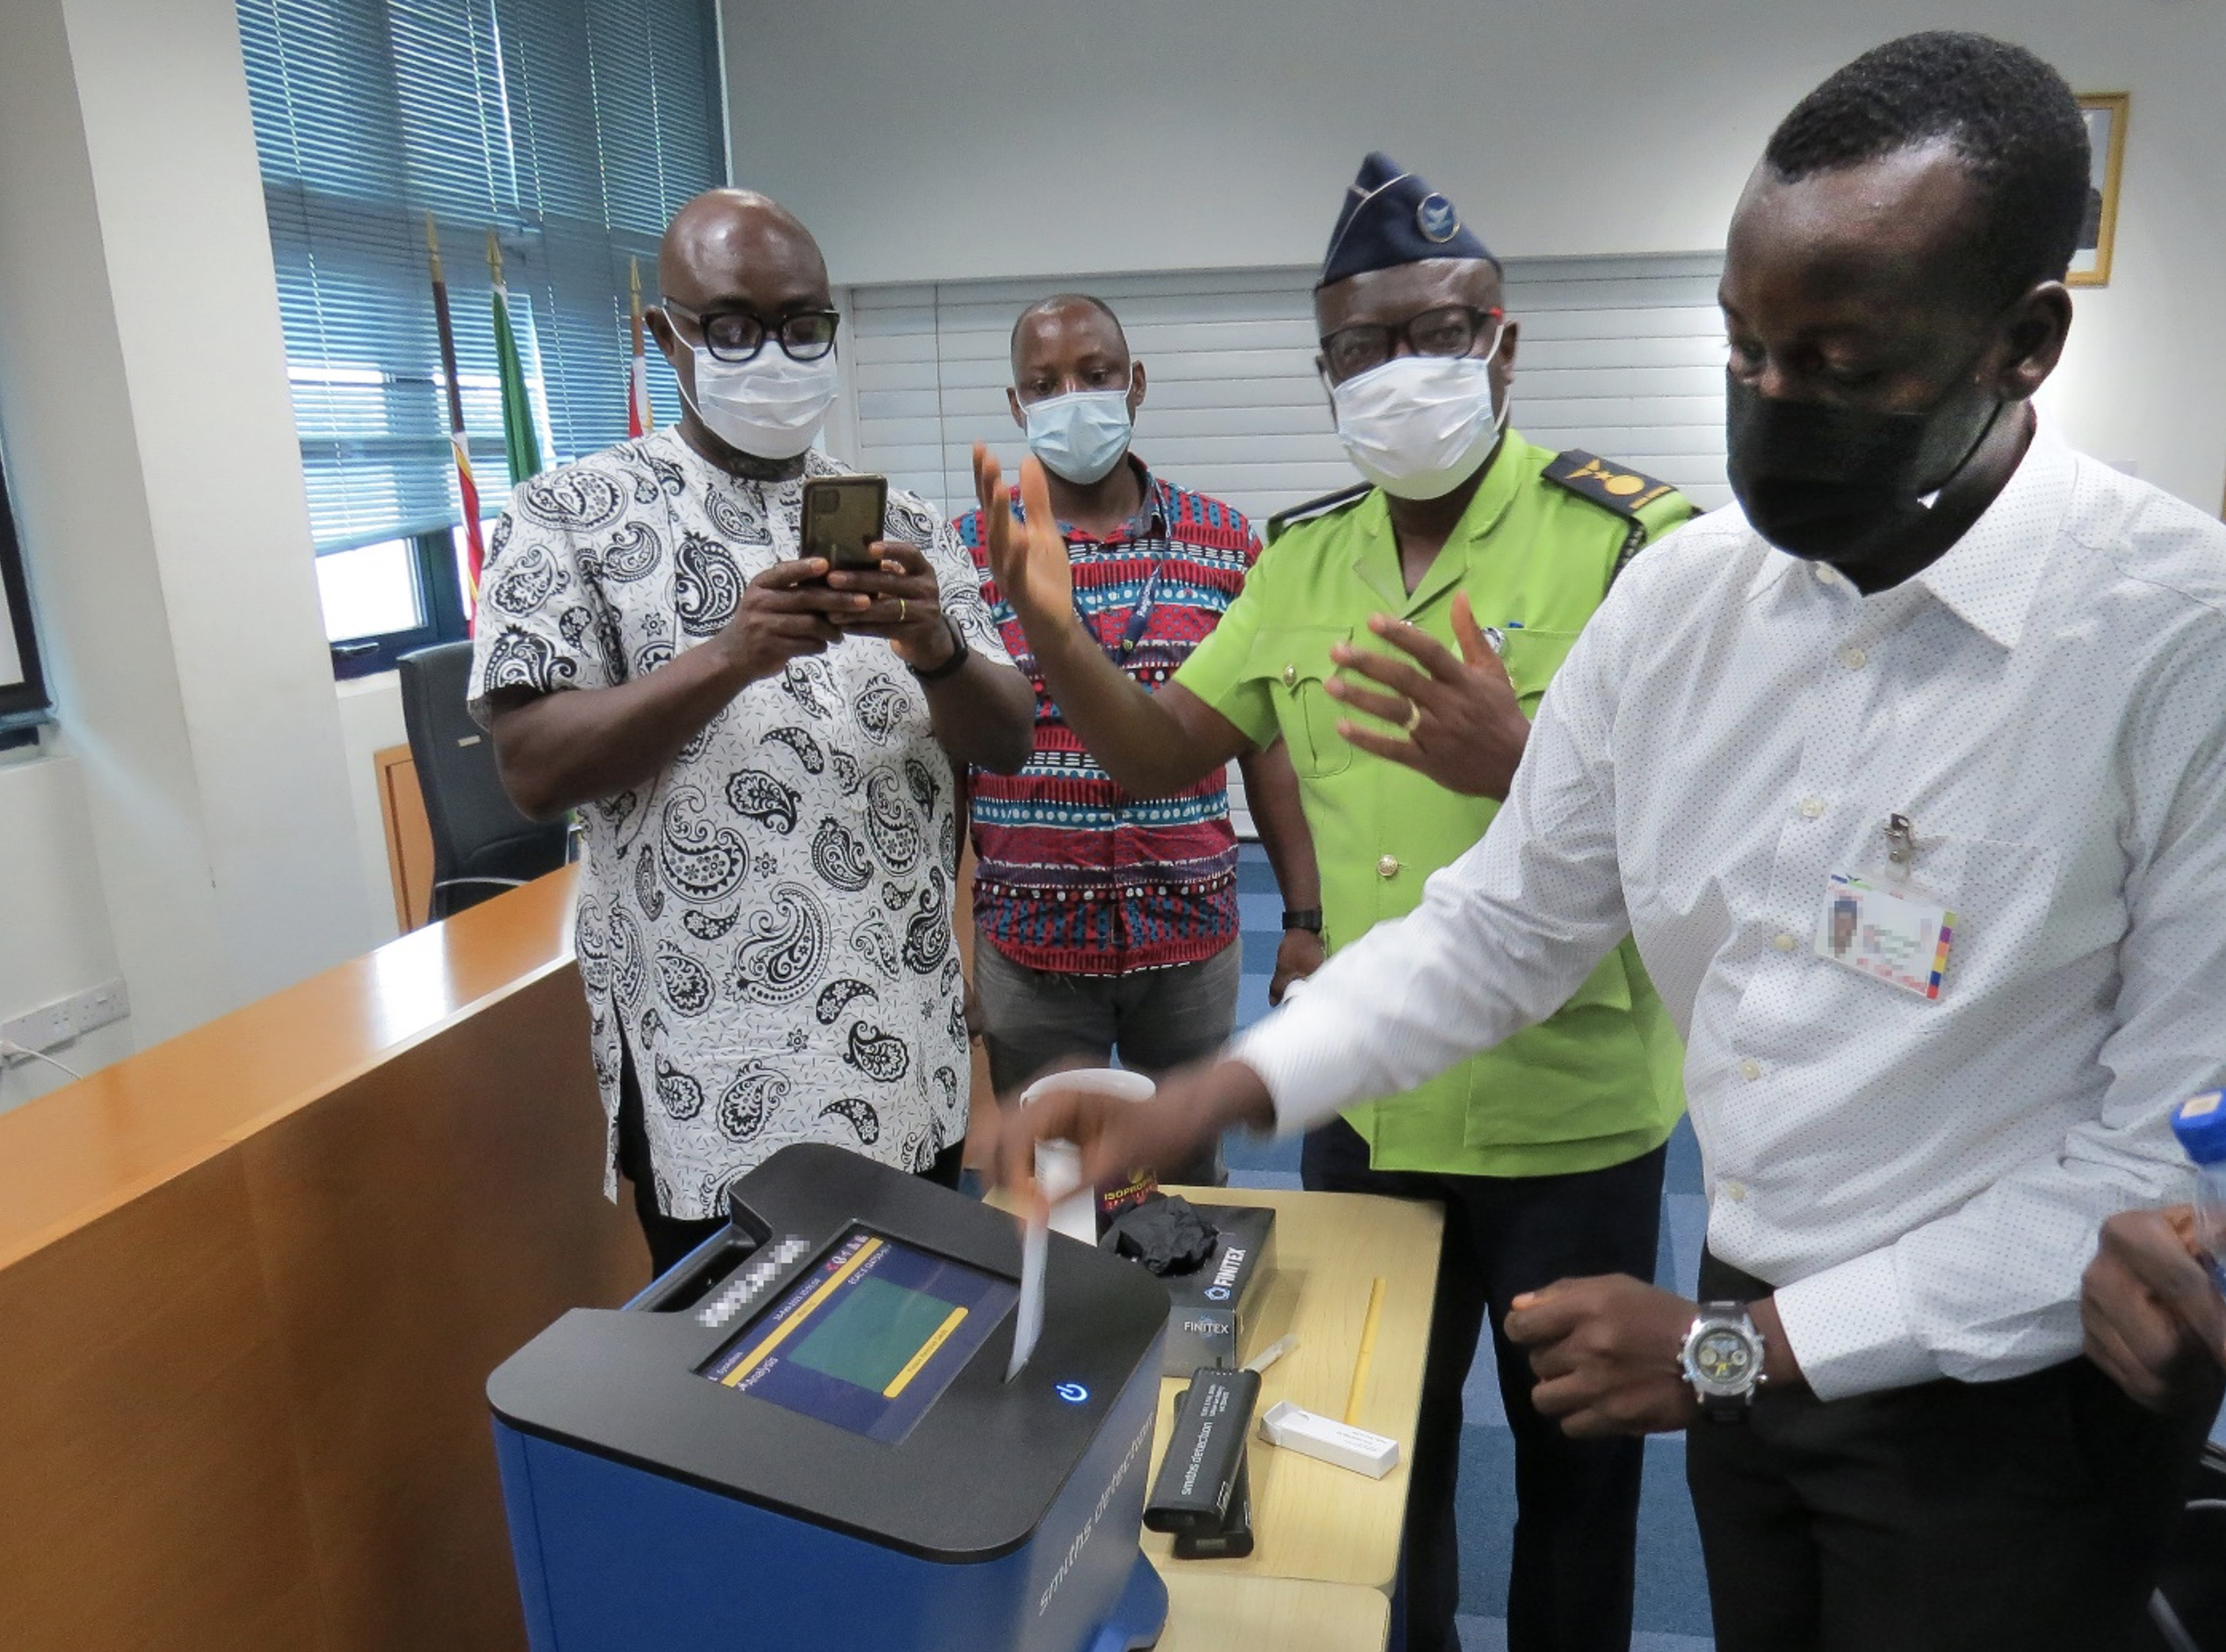 Security officials at Ghana’s Kotoka International Airport undergo U.S. Embassy training on the use of an explosives trace detector in February 2021 donated as part of an ATA equipment grant. (U.S. Department of State photo)